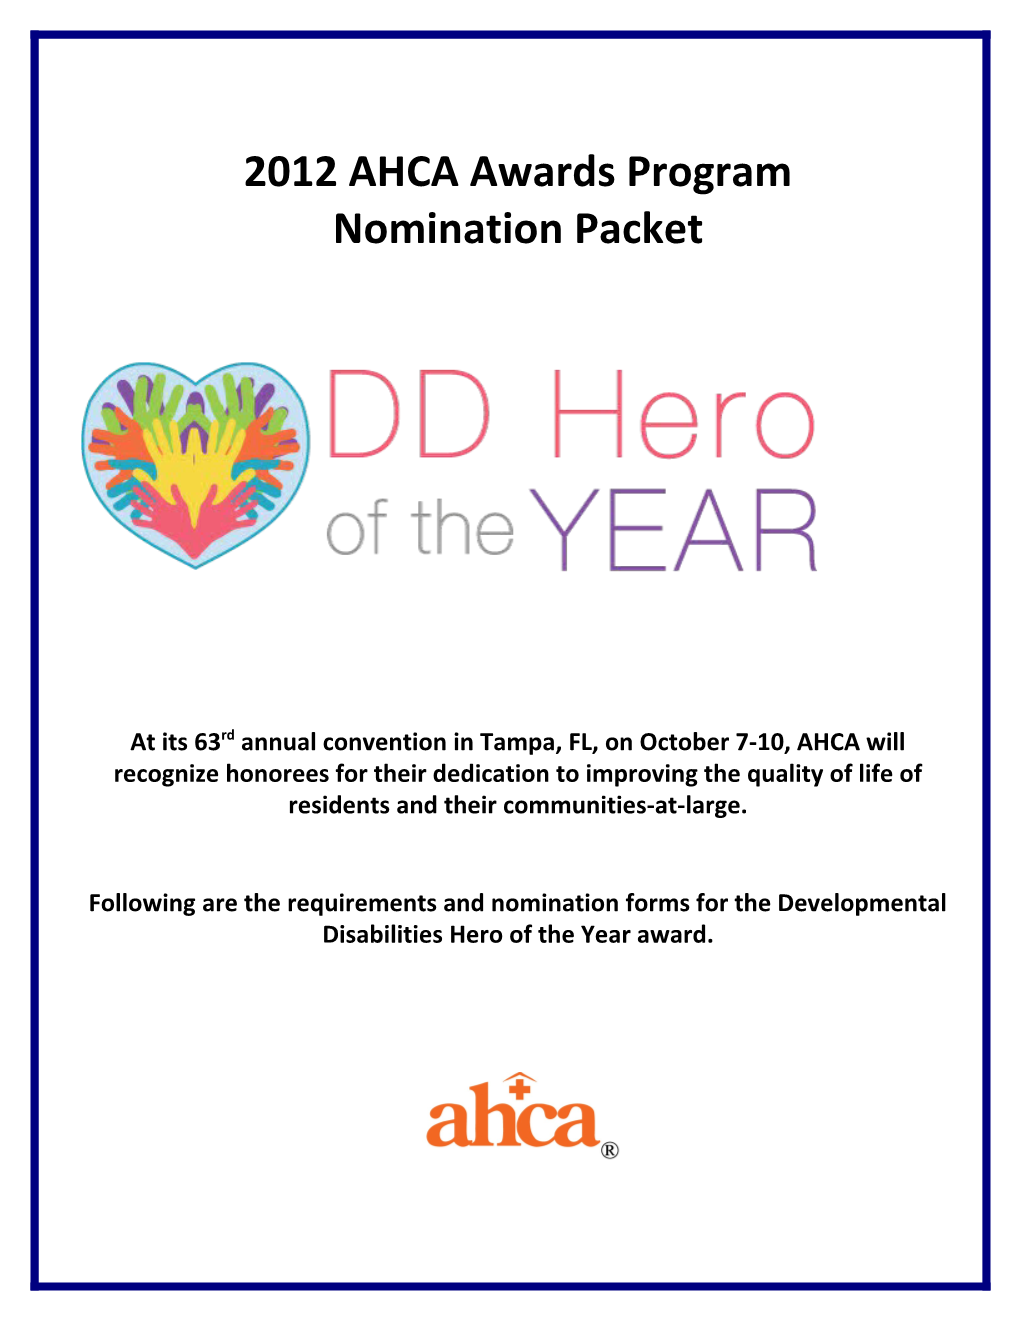 2012 DD Hero of the Year Nomination